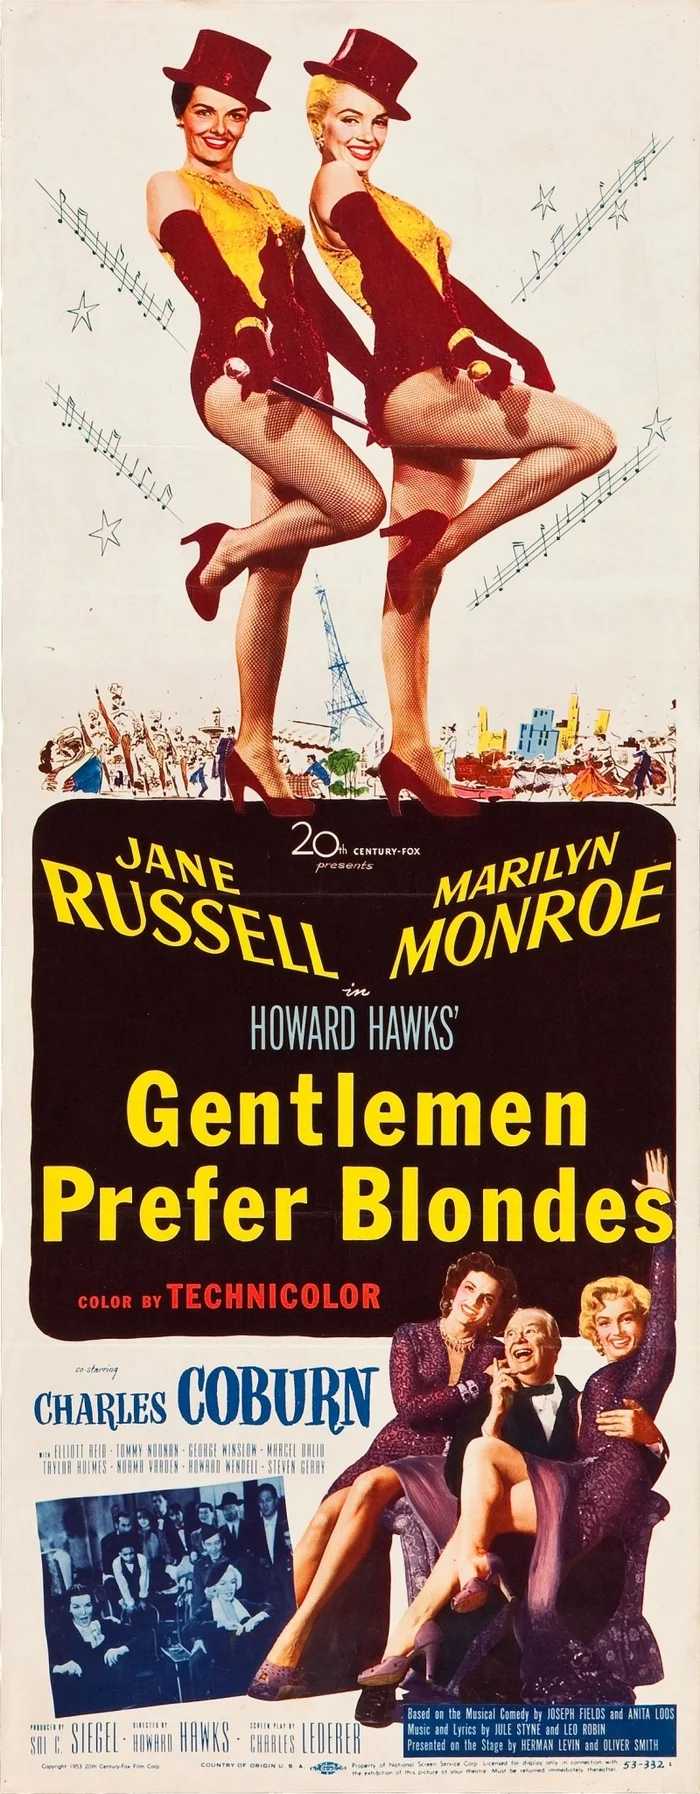 Marilyn Monroe in the movie Gentlemen Prefer Blondes (XXVIII) Cycle Magnificent Marilyn Episode 668 - Cycle, Gorgeous, Marilyn Monroe, Actors and actresses, Celebrities, Blonde, 50th, 1953, Movies, Hollywood, Musical, Comedy, USA, 20th century, Cinema, Gentlemen prefer blondes, Hollywood golden age, Poster, Movie Posters, Girls, Longpost